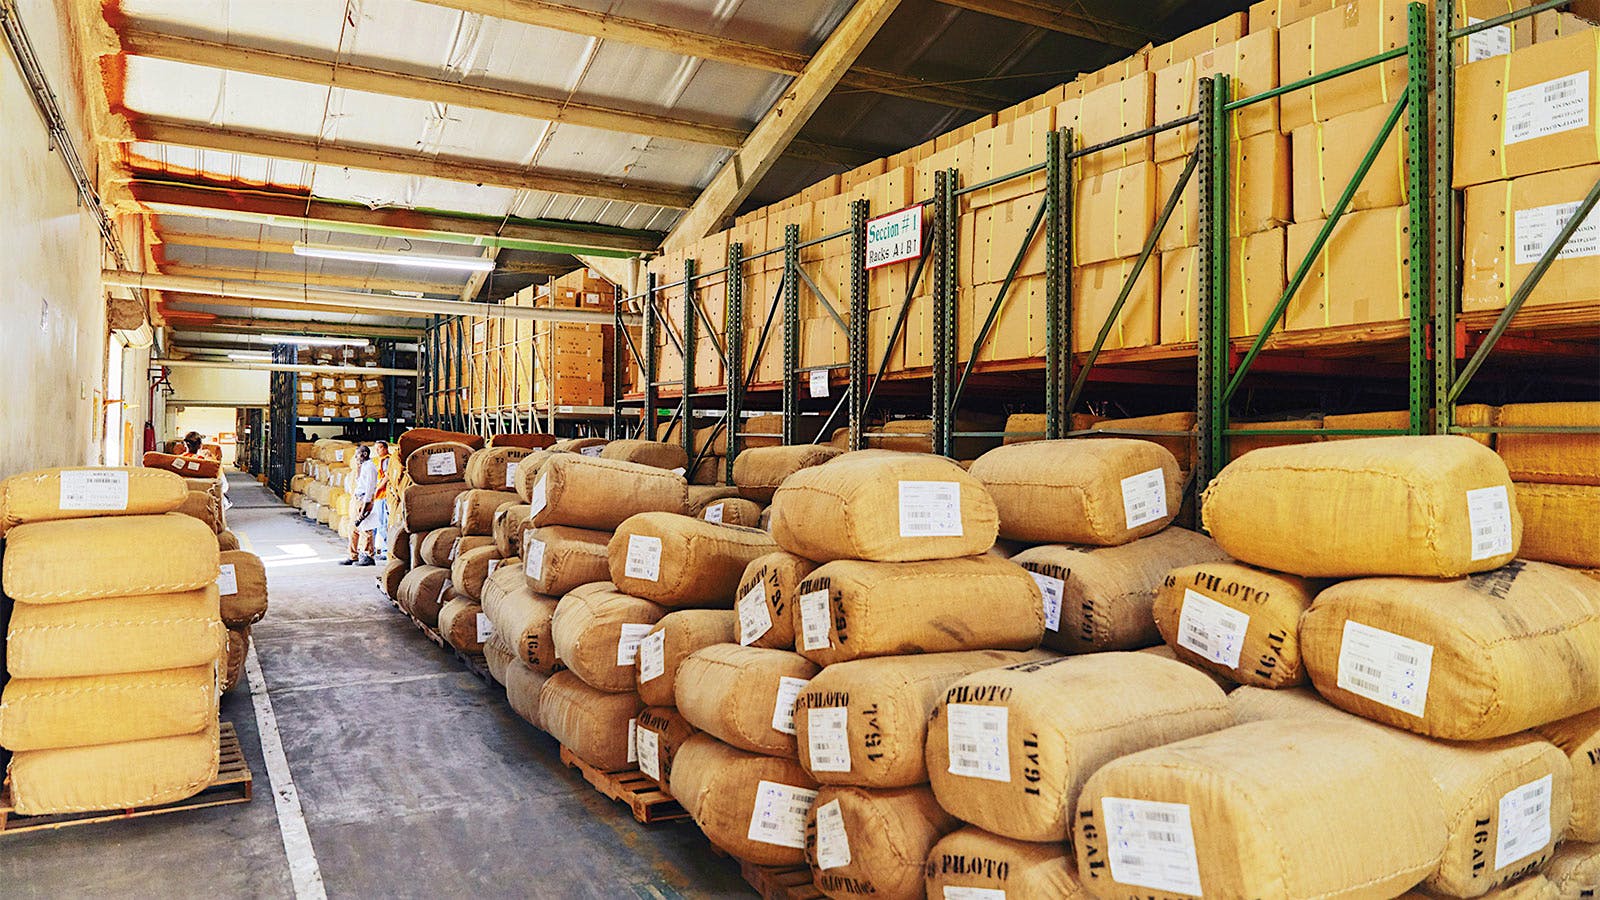 Tabacalera de Garcia’s immense inventory of premium tobacco comes from all over the world, including Ecuador, Mexico, Cameroon, Indonesia, Nicaragua, the Dominican Republic and the United States.